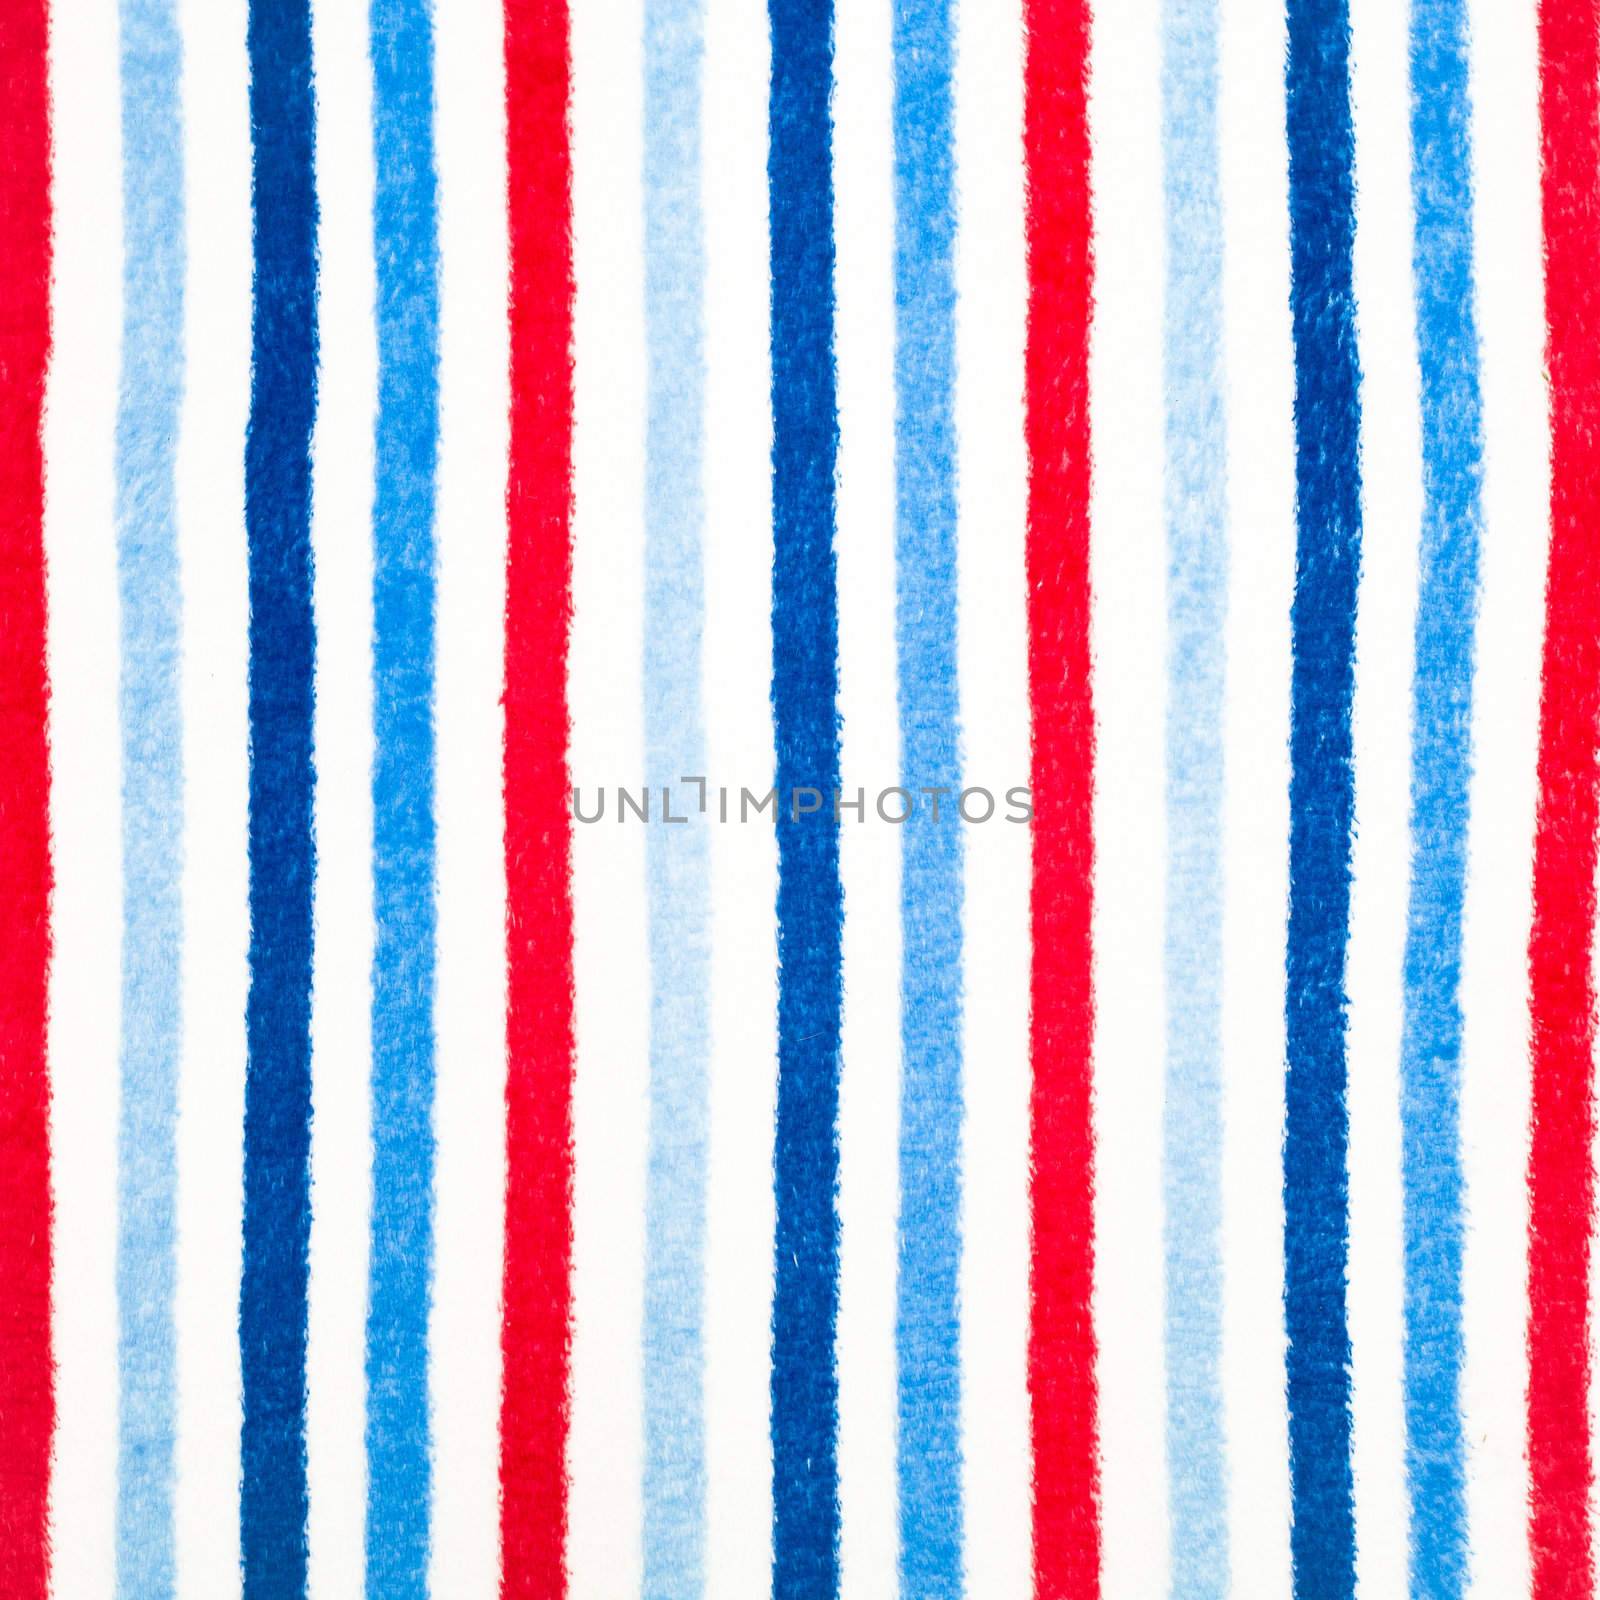 A colorful stripy background of fleece material